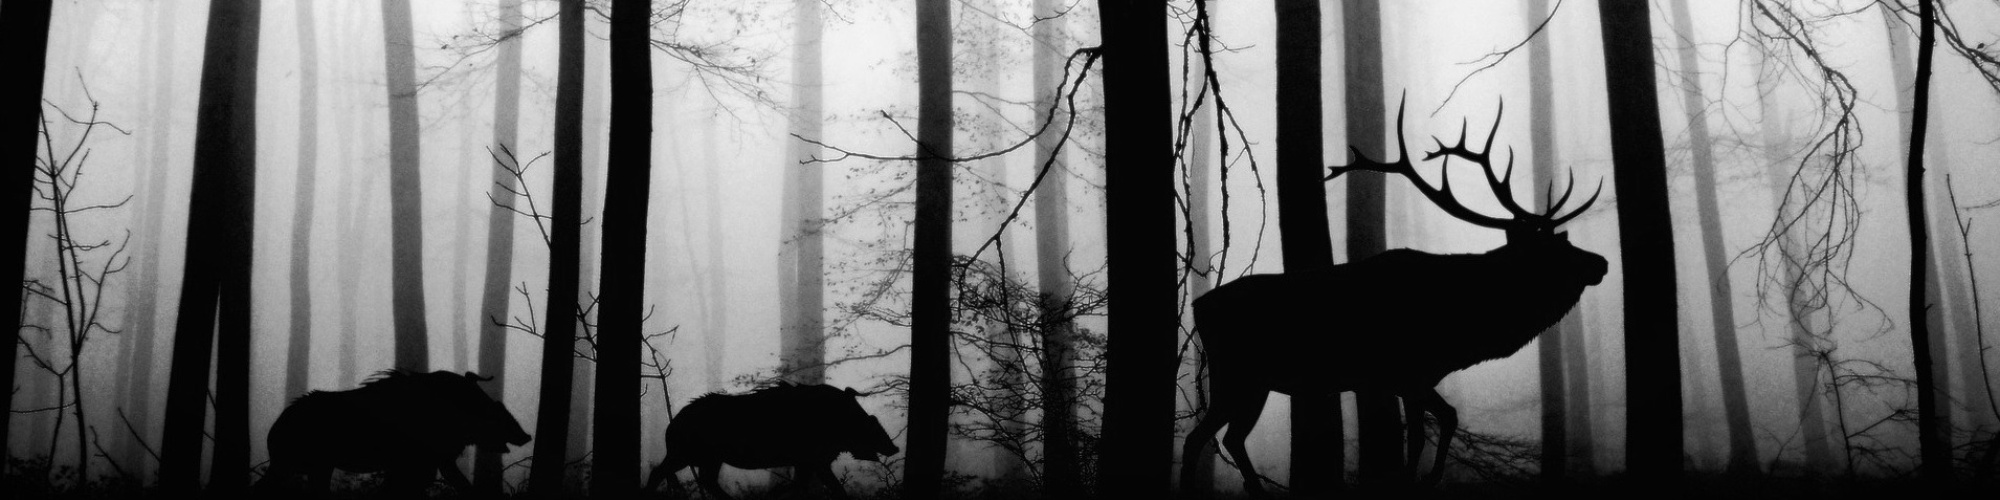 A black and white image of a deer and two boars crossing a forest.